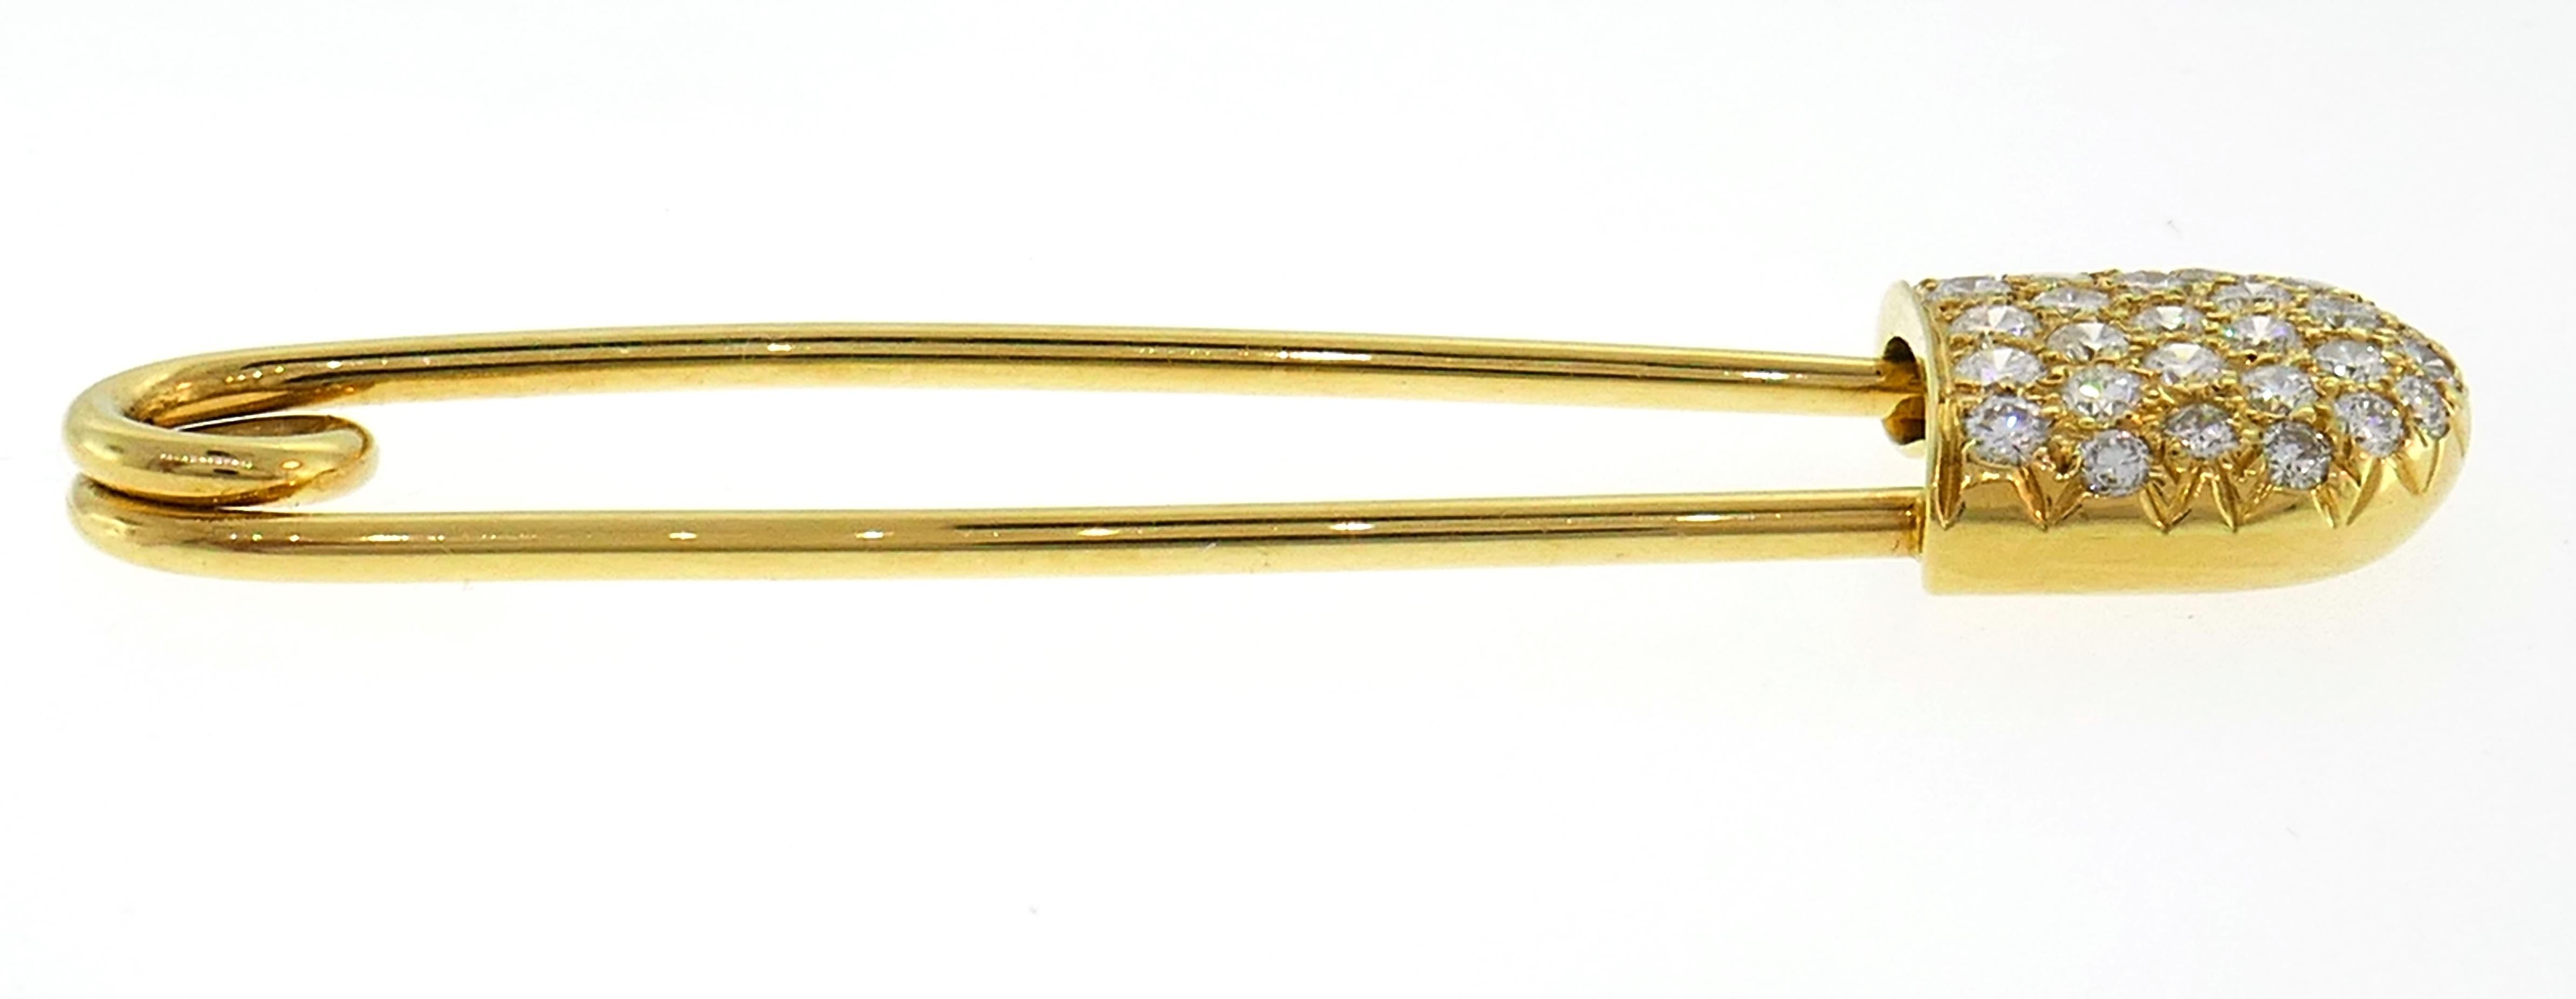 Chic safety pin created by Cartier in the 1980s. Stylish and wearable, the pin is a great addition to your jewelry collection. 
Made of 18 karat (stamped) yellow gold and set with thirty-one round brilliant cut diamonds (F-G color, VVS2 clarity,